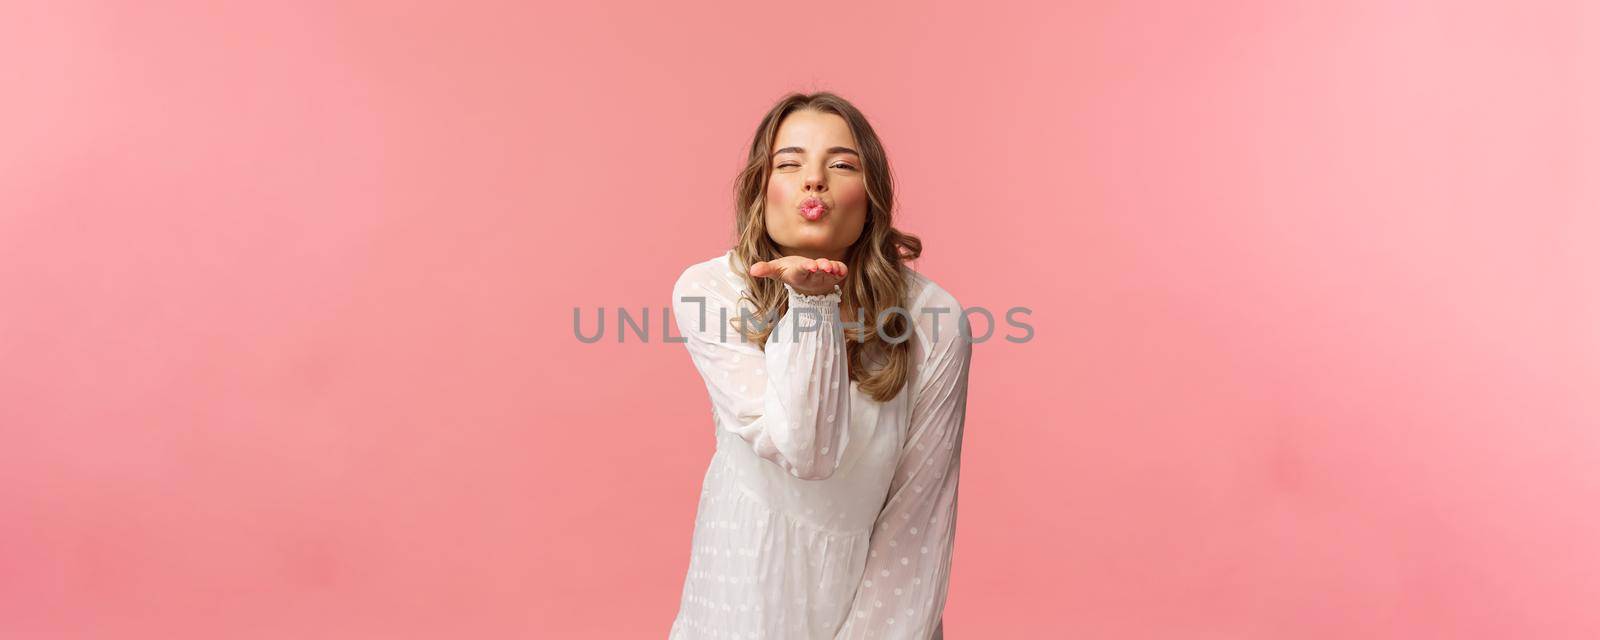 Beauty, fashion and women concept. Portrait of romantic tender, young blond woman in white trendy dress, sending air kiss at camera with sassy flirty smile, hold hand near lips, pink background.